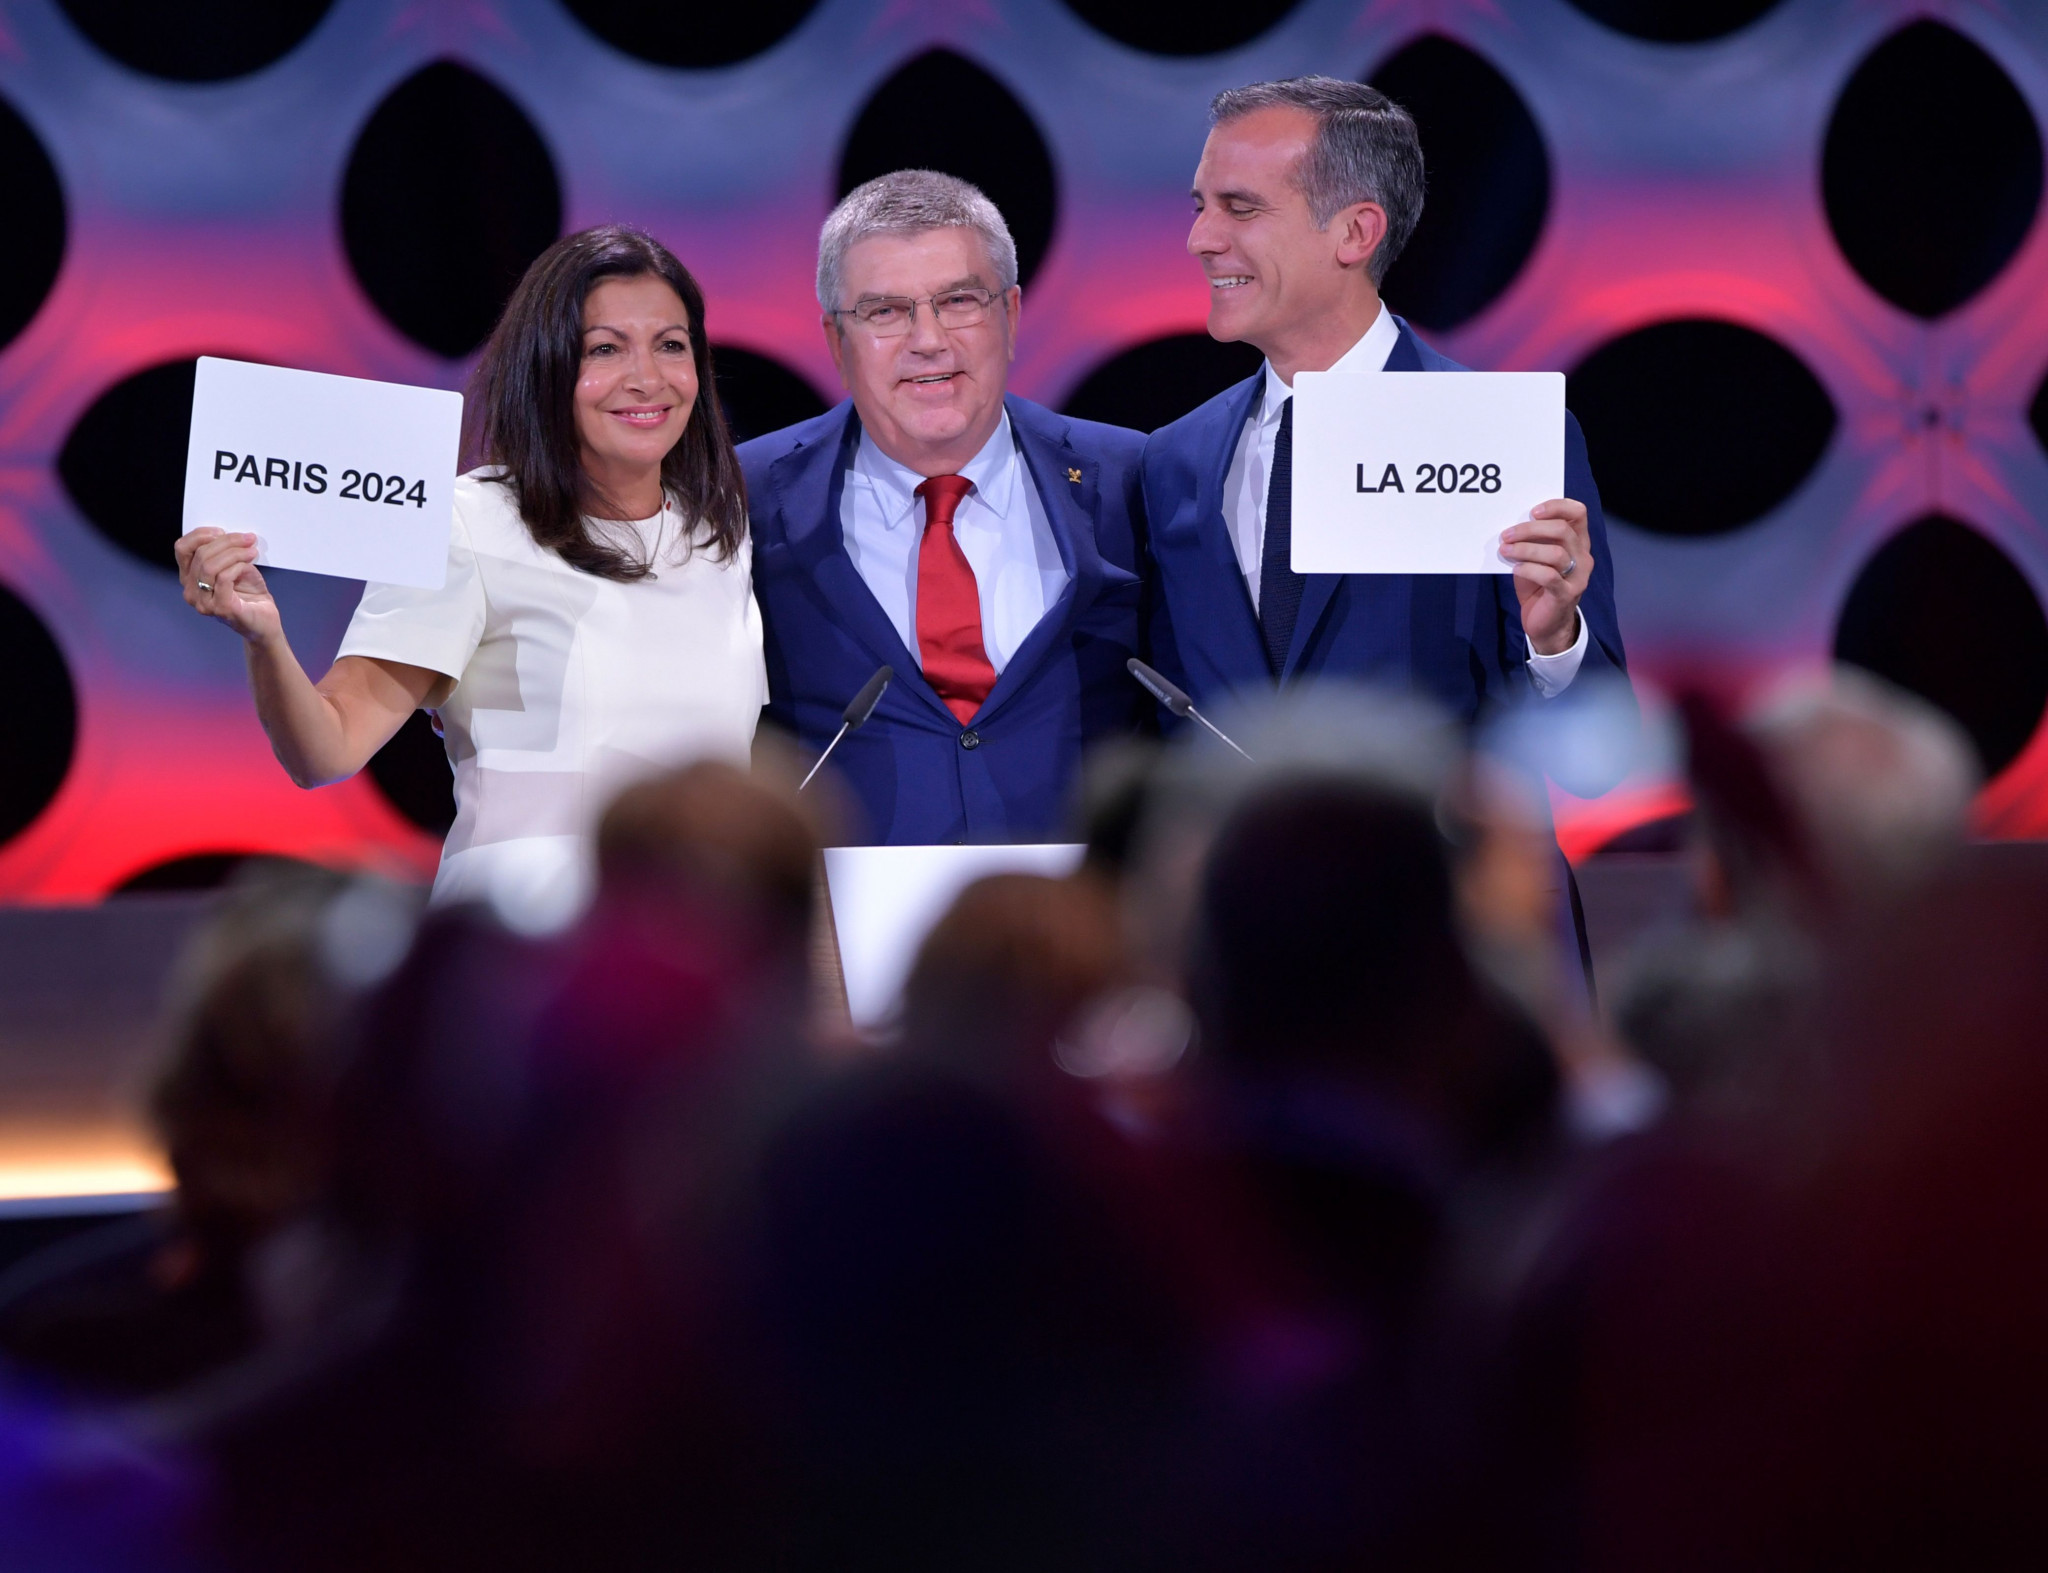 Thomas Bach oversaw the joint award of the 2024 and 2028 Summer Olympic Games to Paris and Los Angeles ©Getty Images